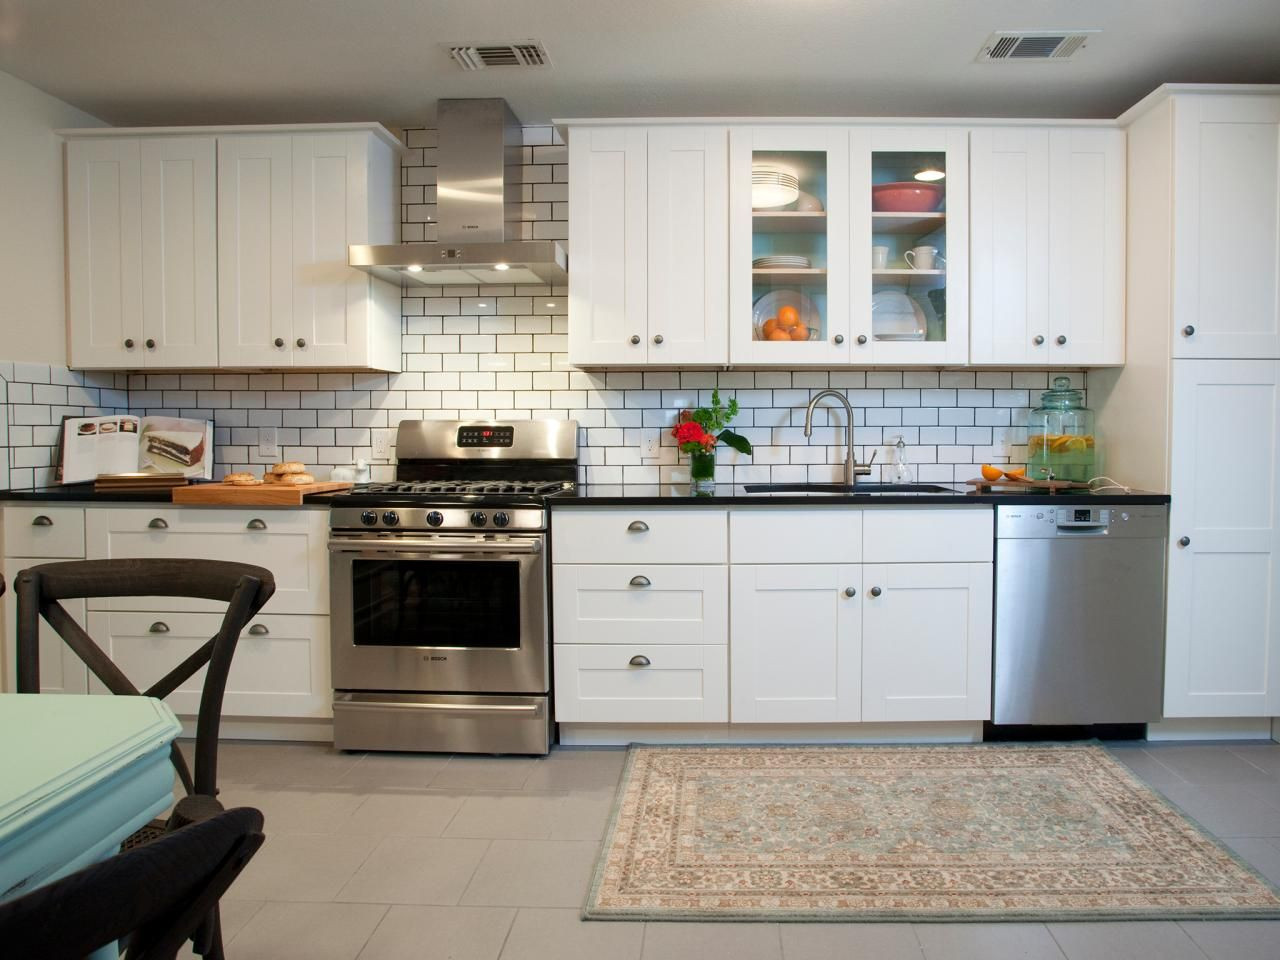 Kitchen With White Subway Tile
 Dress Your Kitchen In Style With Some White Subway Tiles